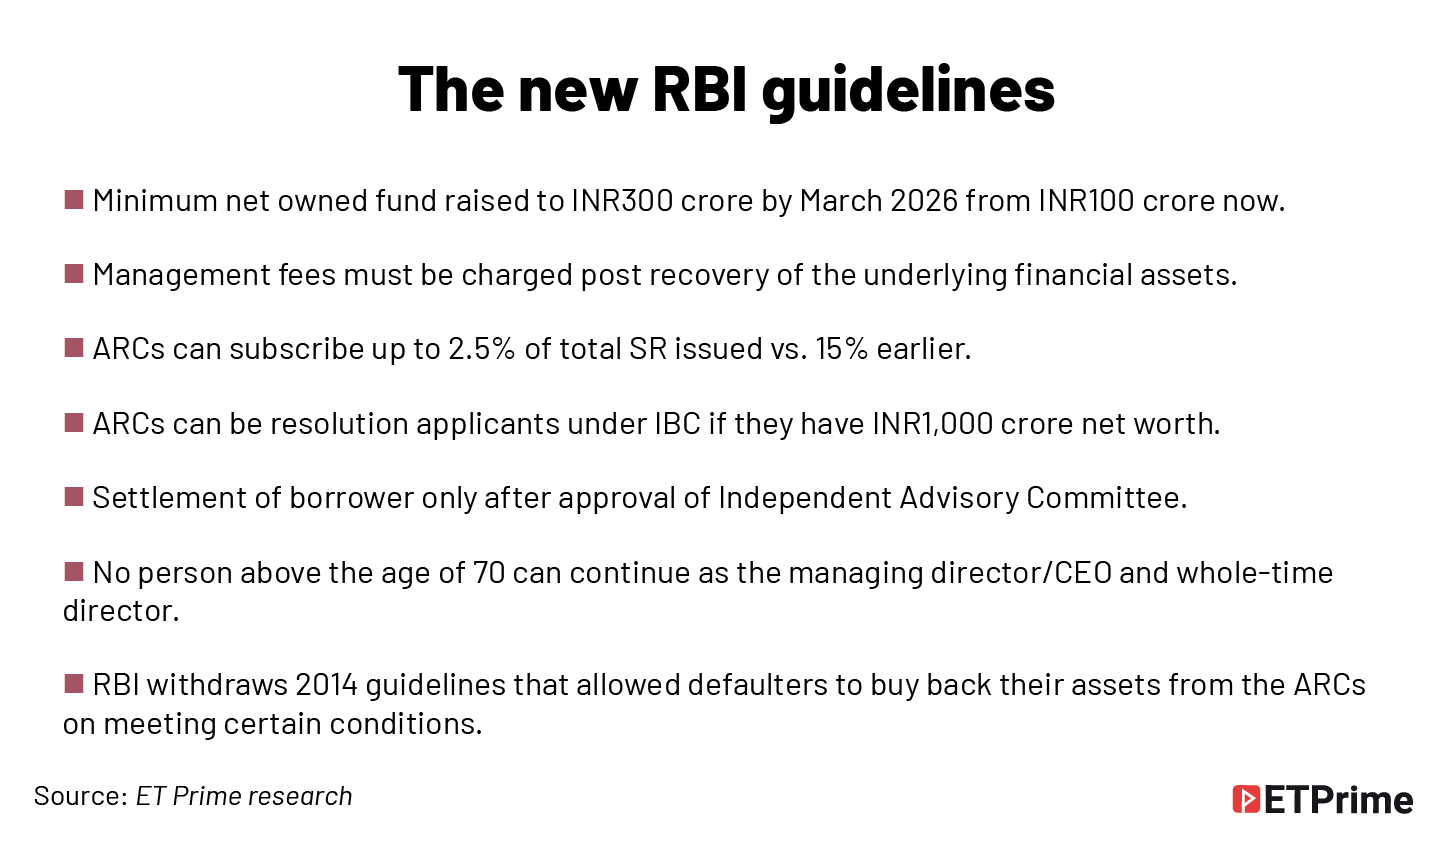 The new RBI guidelines@2x